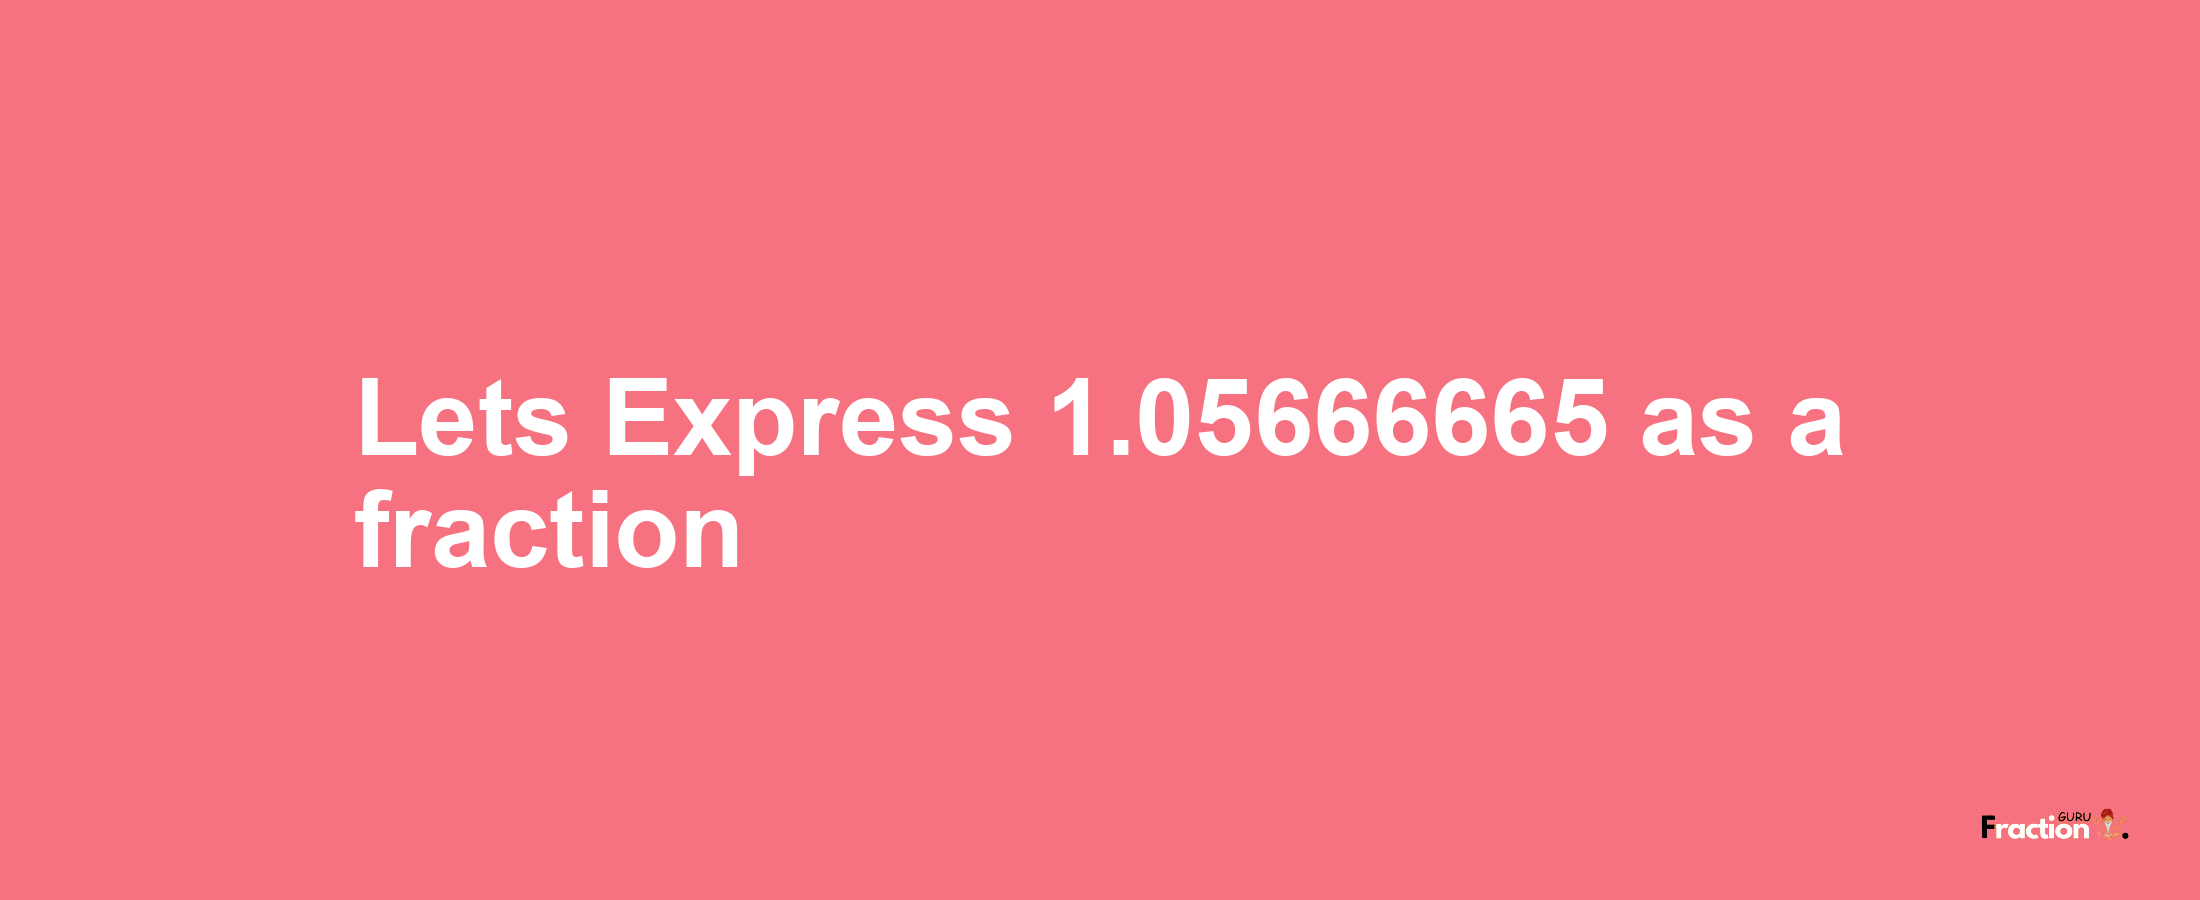 Lets Express 1.05666665 as afraction